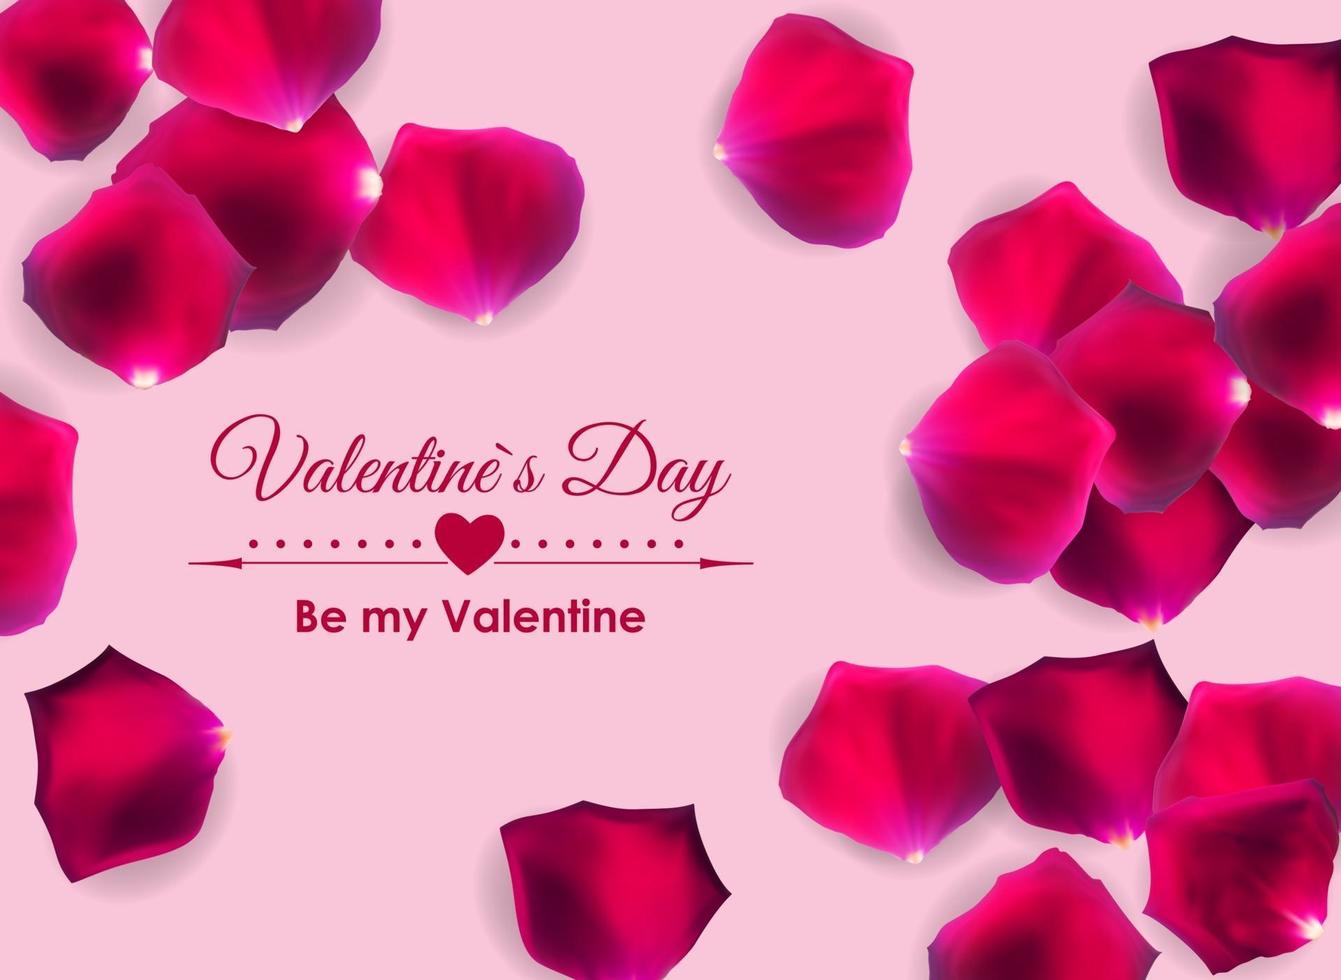 Valentine's Day Love and Feelings Background Design. vector